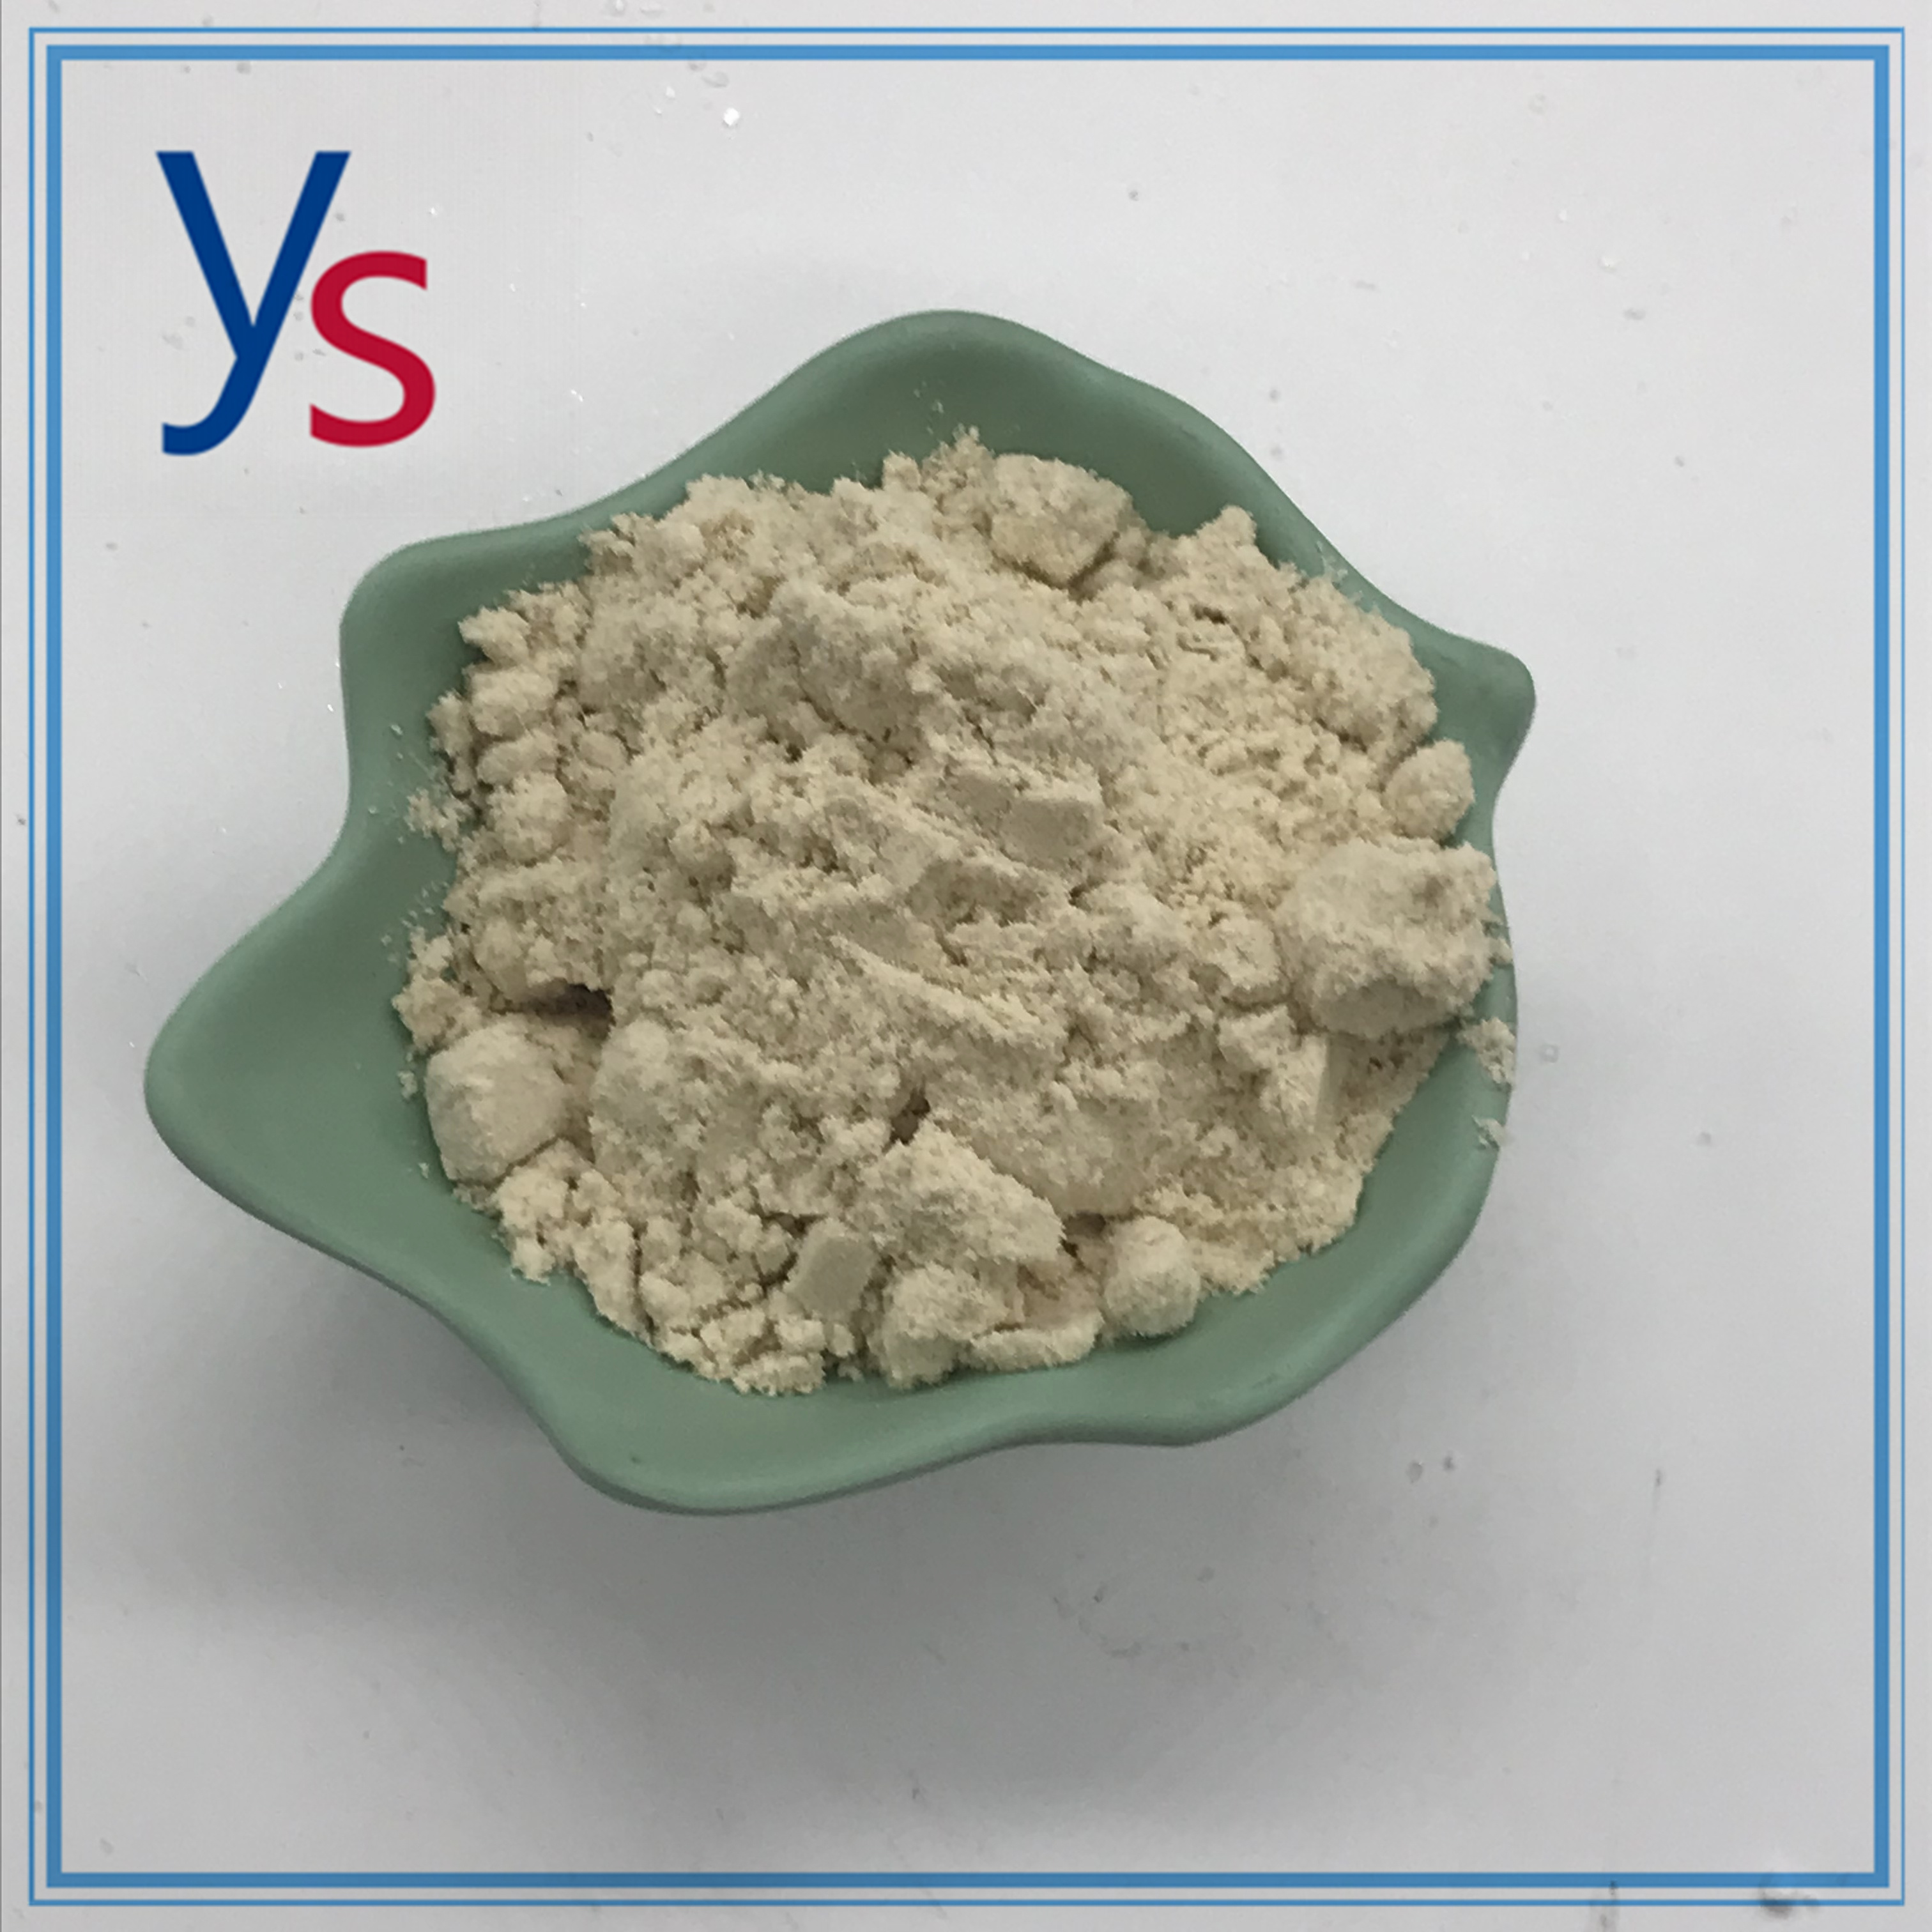 High Yield CAS 236117-38-7 2-iodo-1-p-tolylpropan-1-one 